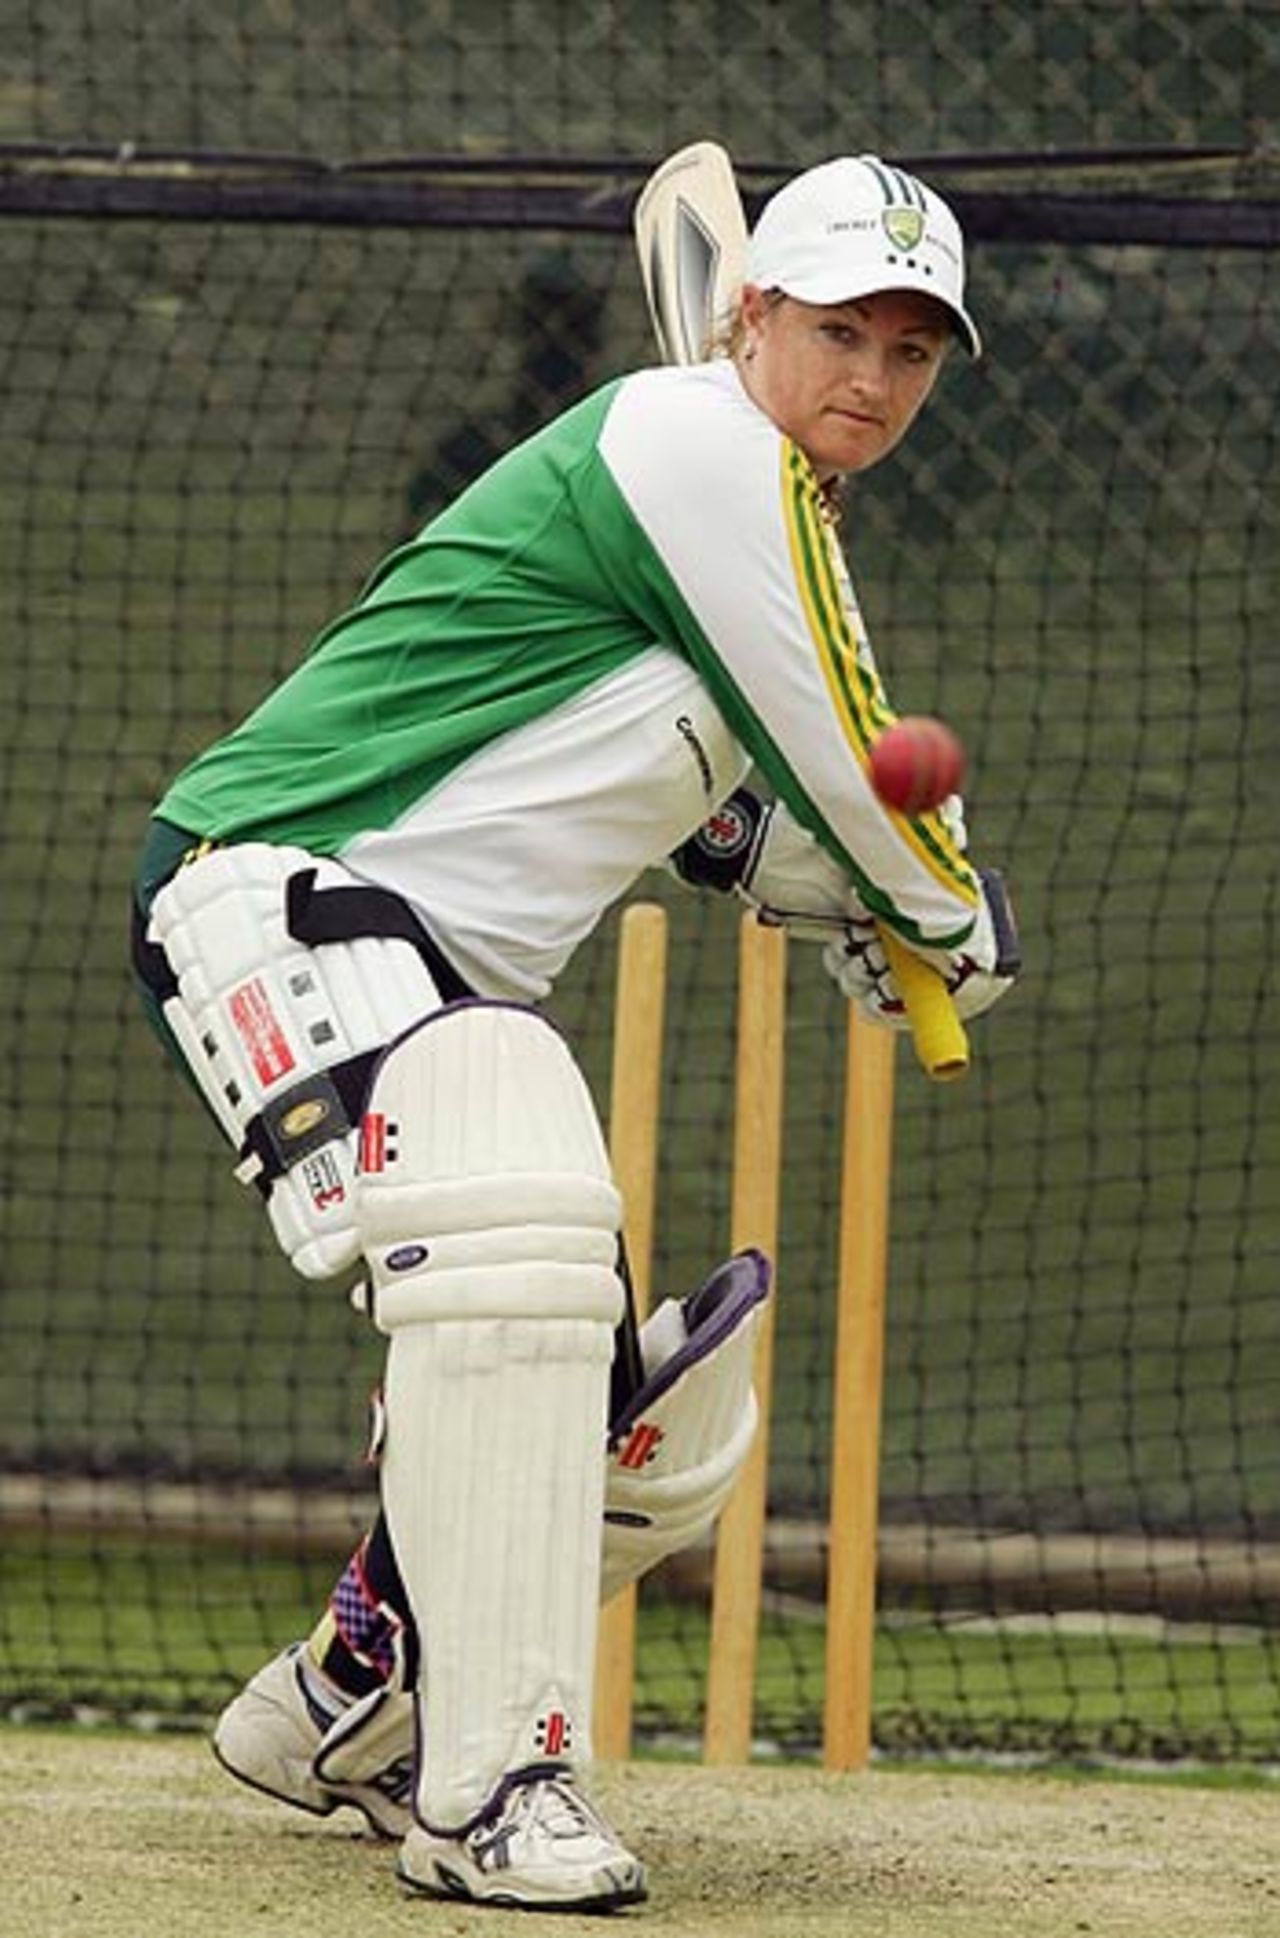 Karen Rolton plays a shot at the nets before the first Test against India, Adelaide Oval, February 17 2006